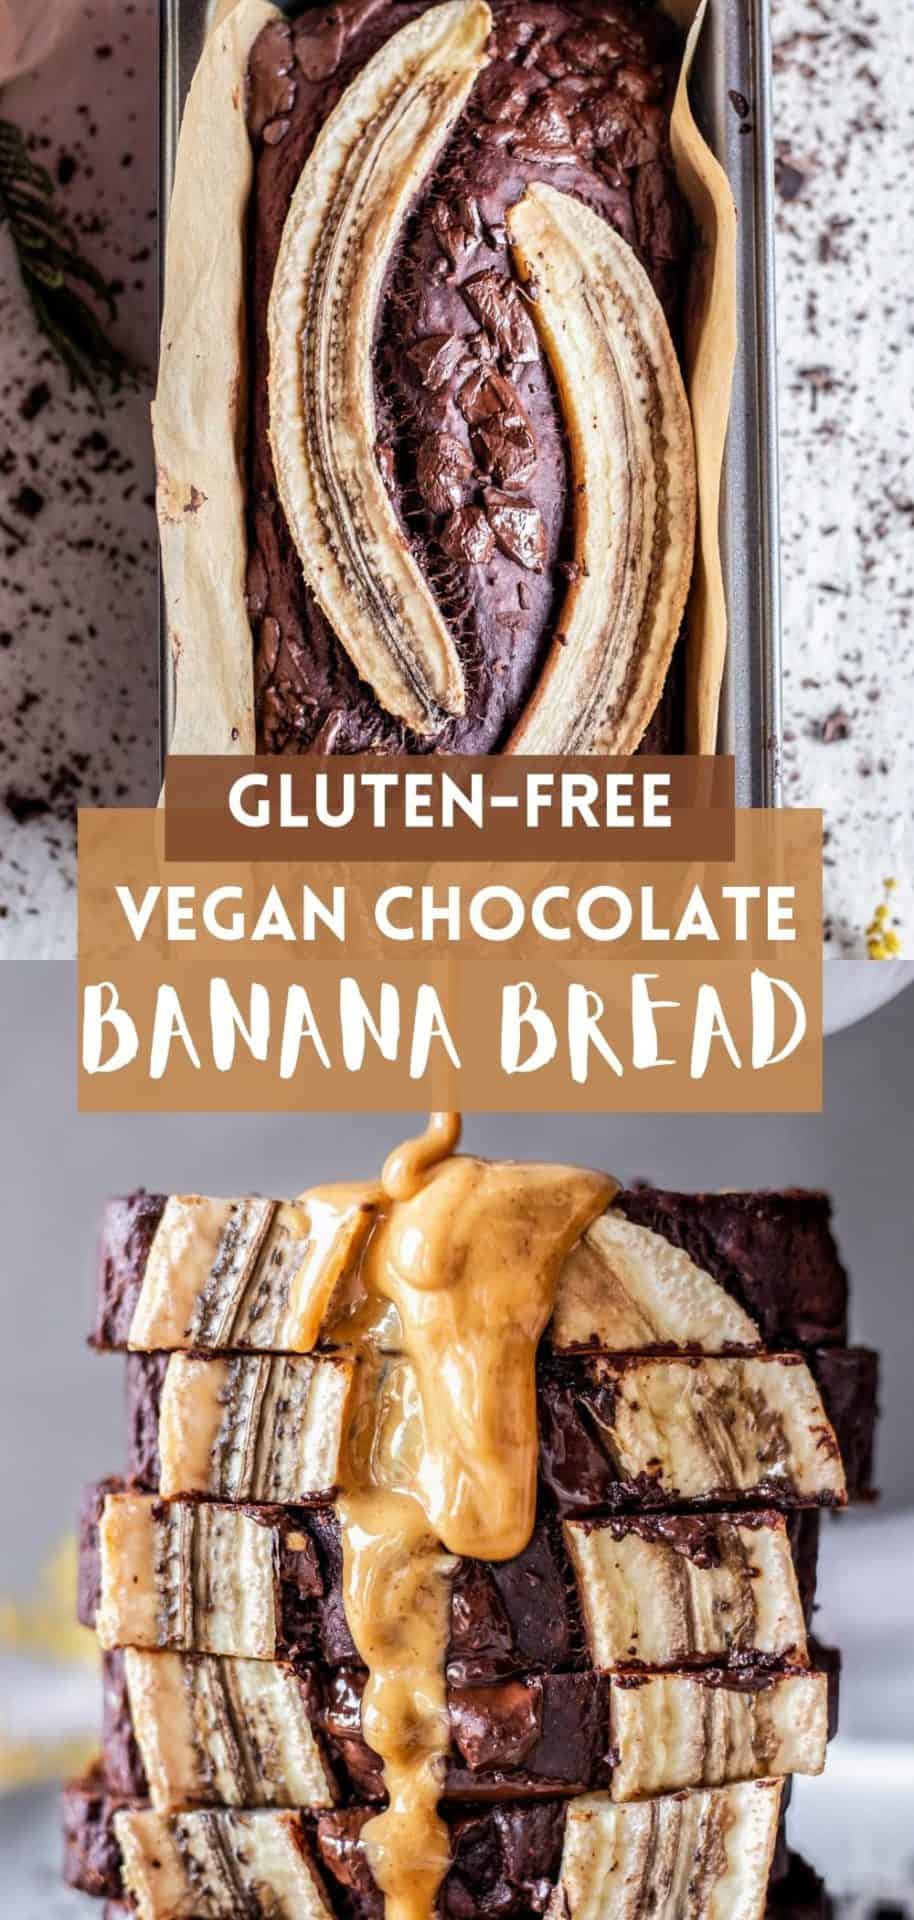 This Gluten-Free Vegan Chocolate Banana Bread is moist, tender, super chocolaty, rich, loaded with bananas and so delicious!
